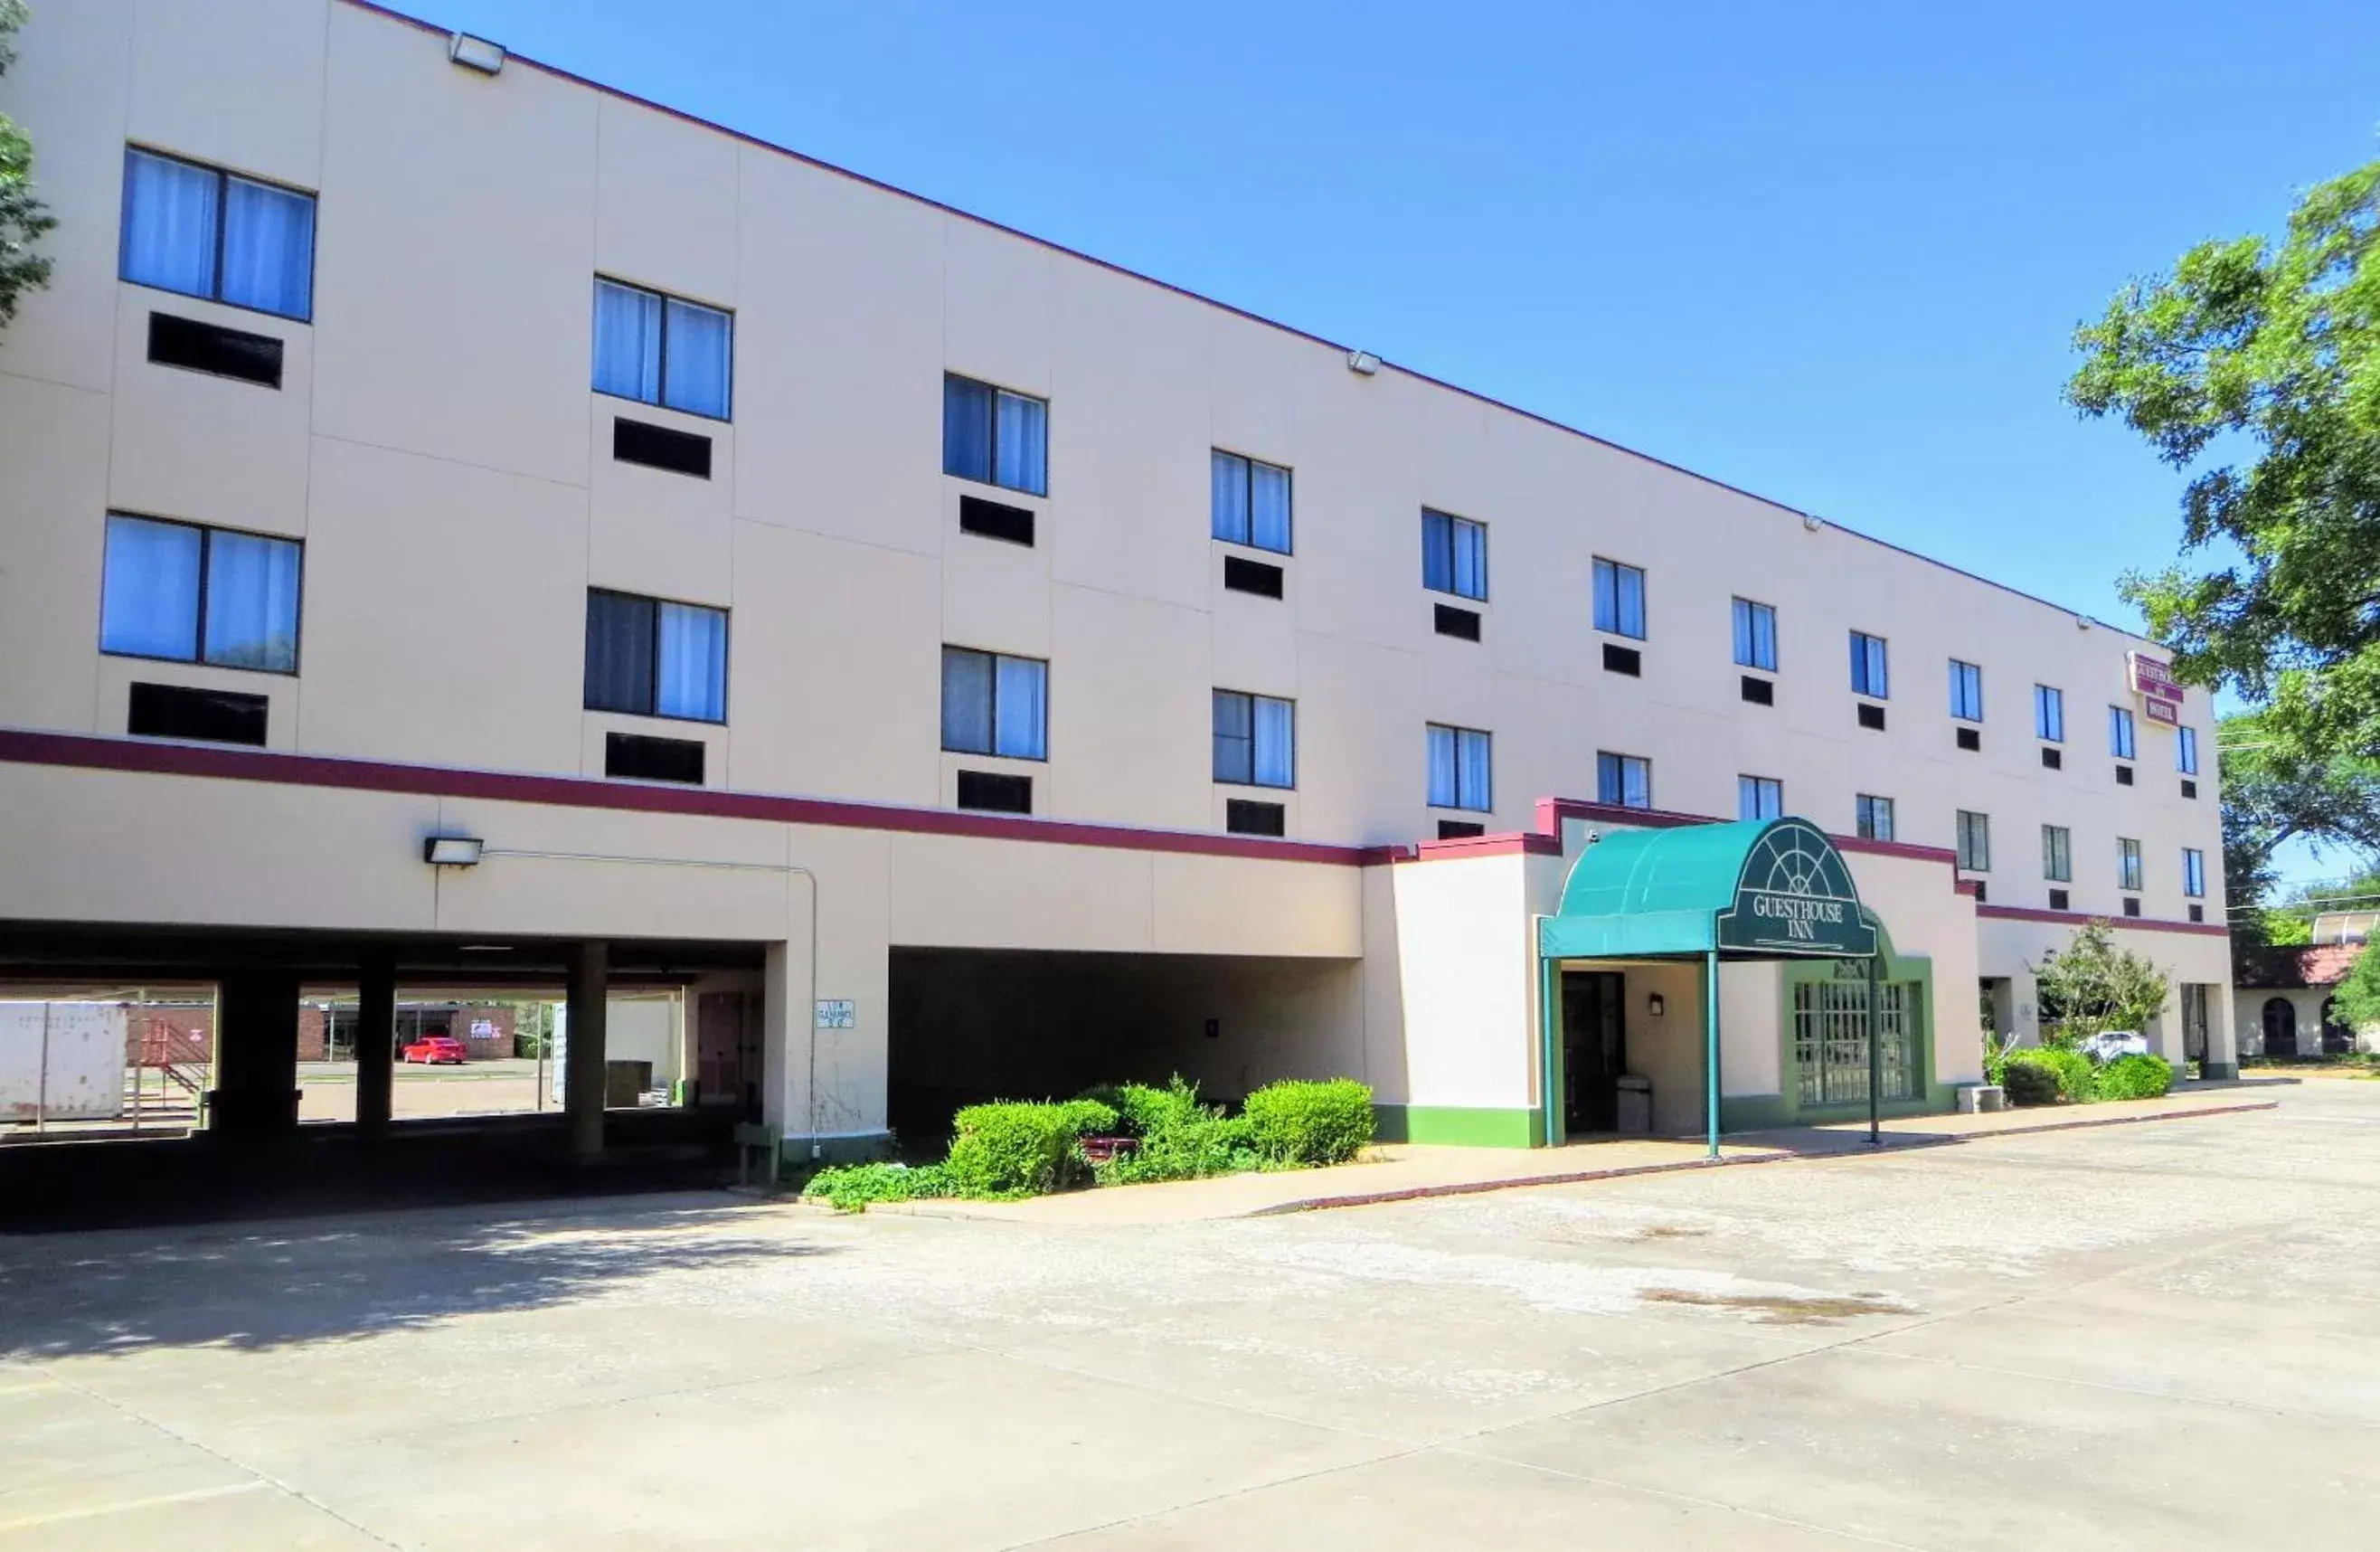 Property Building in Guest House Inn Medical District near Texas Tech Univ